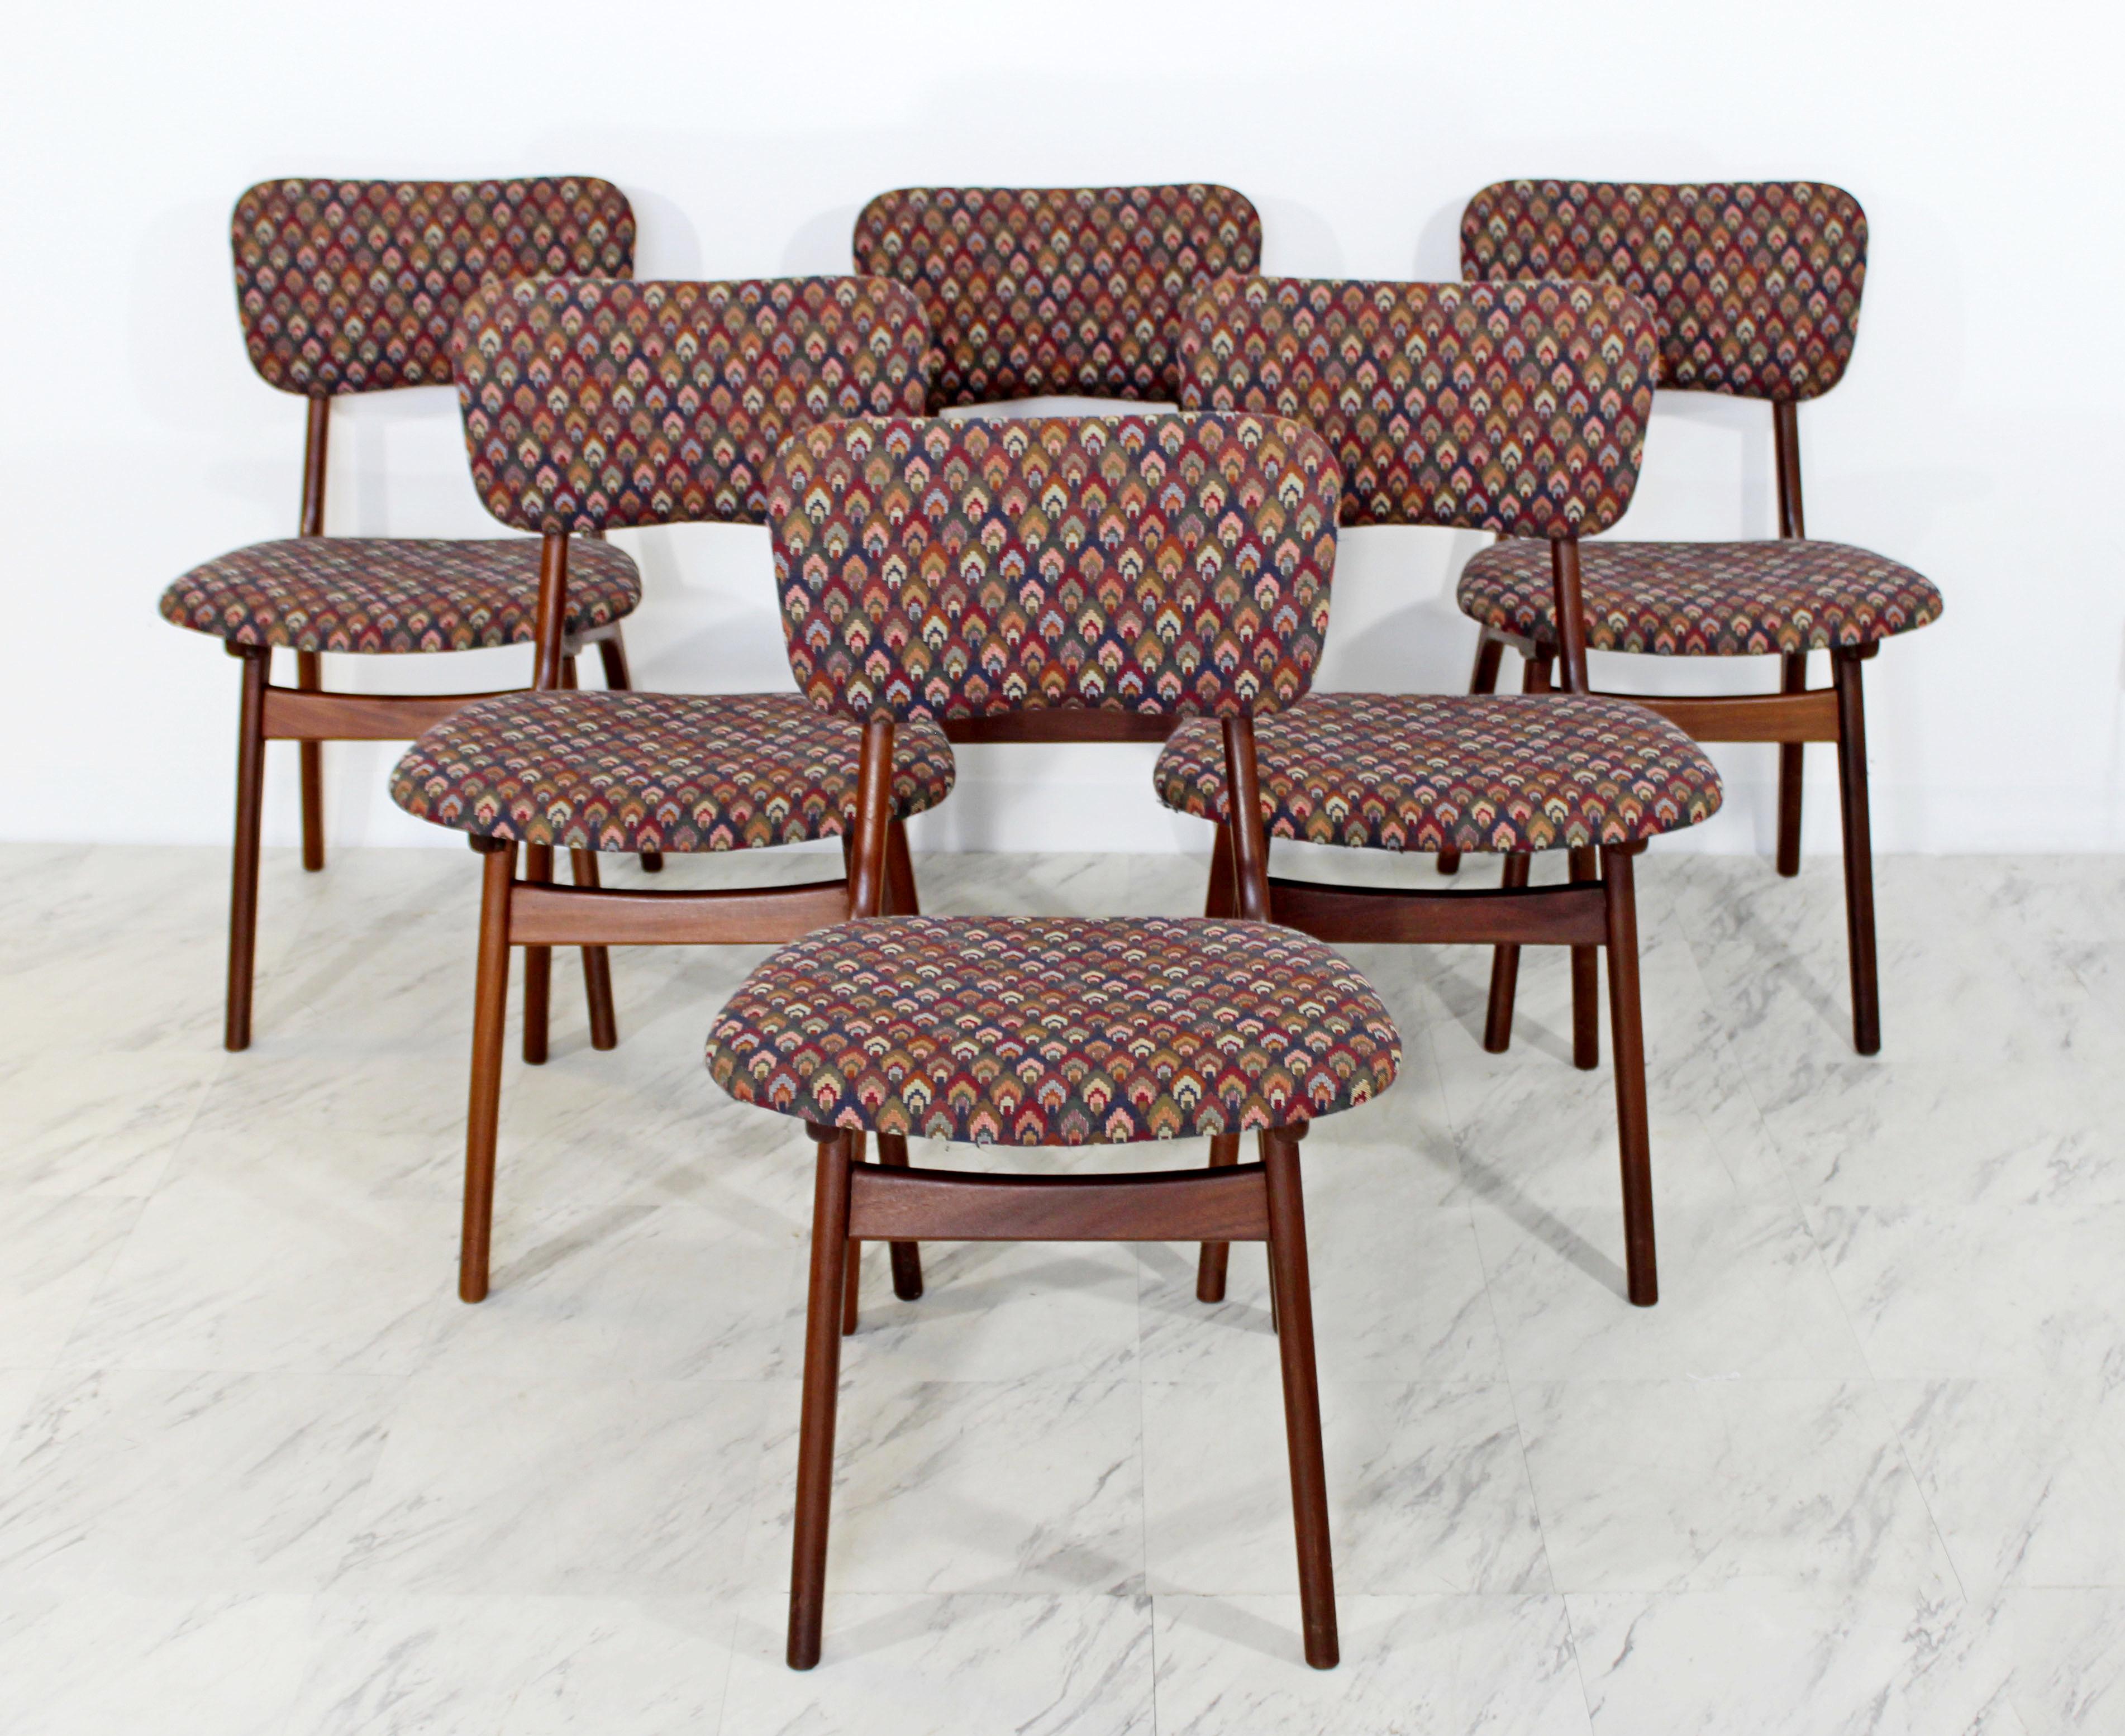 For your consideration is a set of six, teak, side dining chairs, designed by Arne Hovmand Olsen by Silkeborg, made in Denmark, circa the 1960s. In excellent condition. The dimensions are 18.5